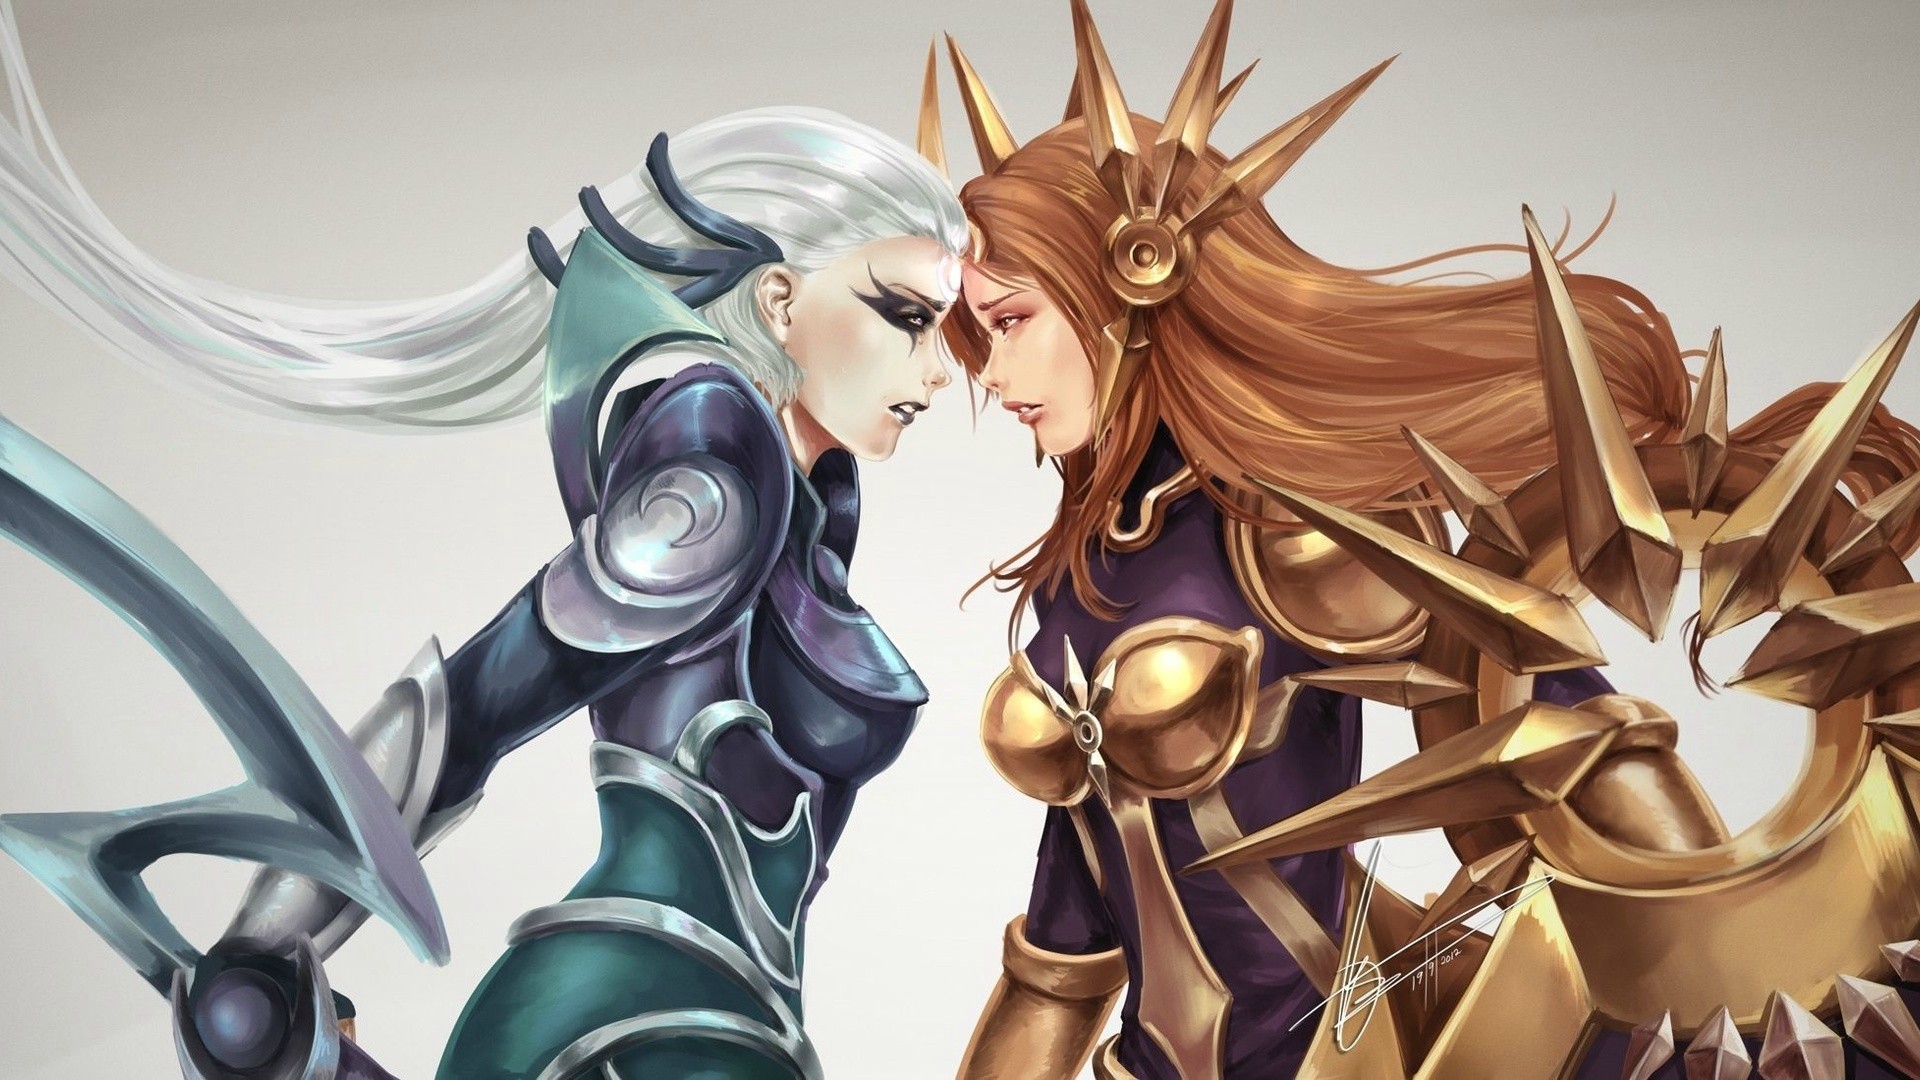 video game, league of legends, diana (league of legends), leona (league of legends)